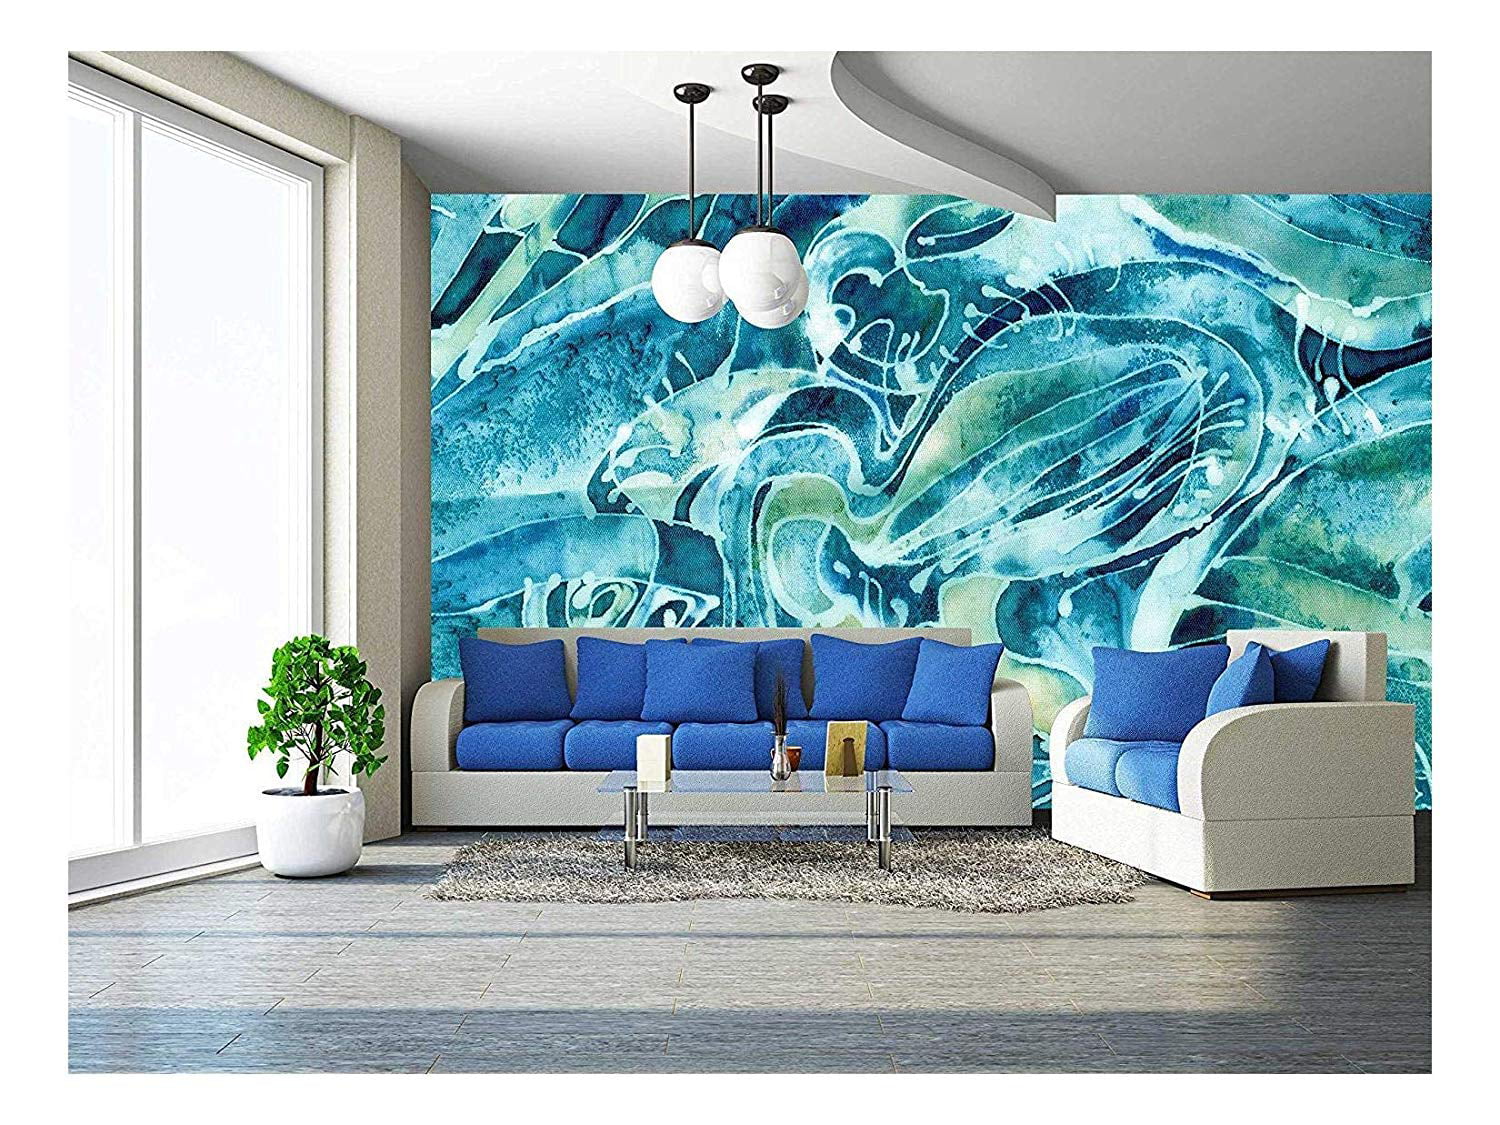 Wall26 Abstract Background on the "Sea Water" - Removable Wall Mural | Self-adhesive Large